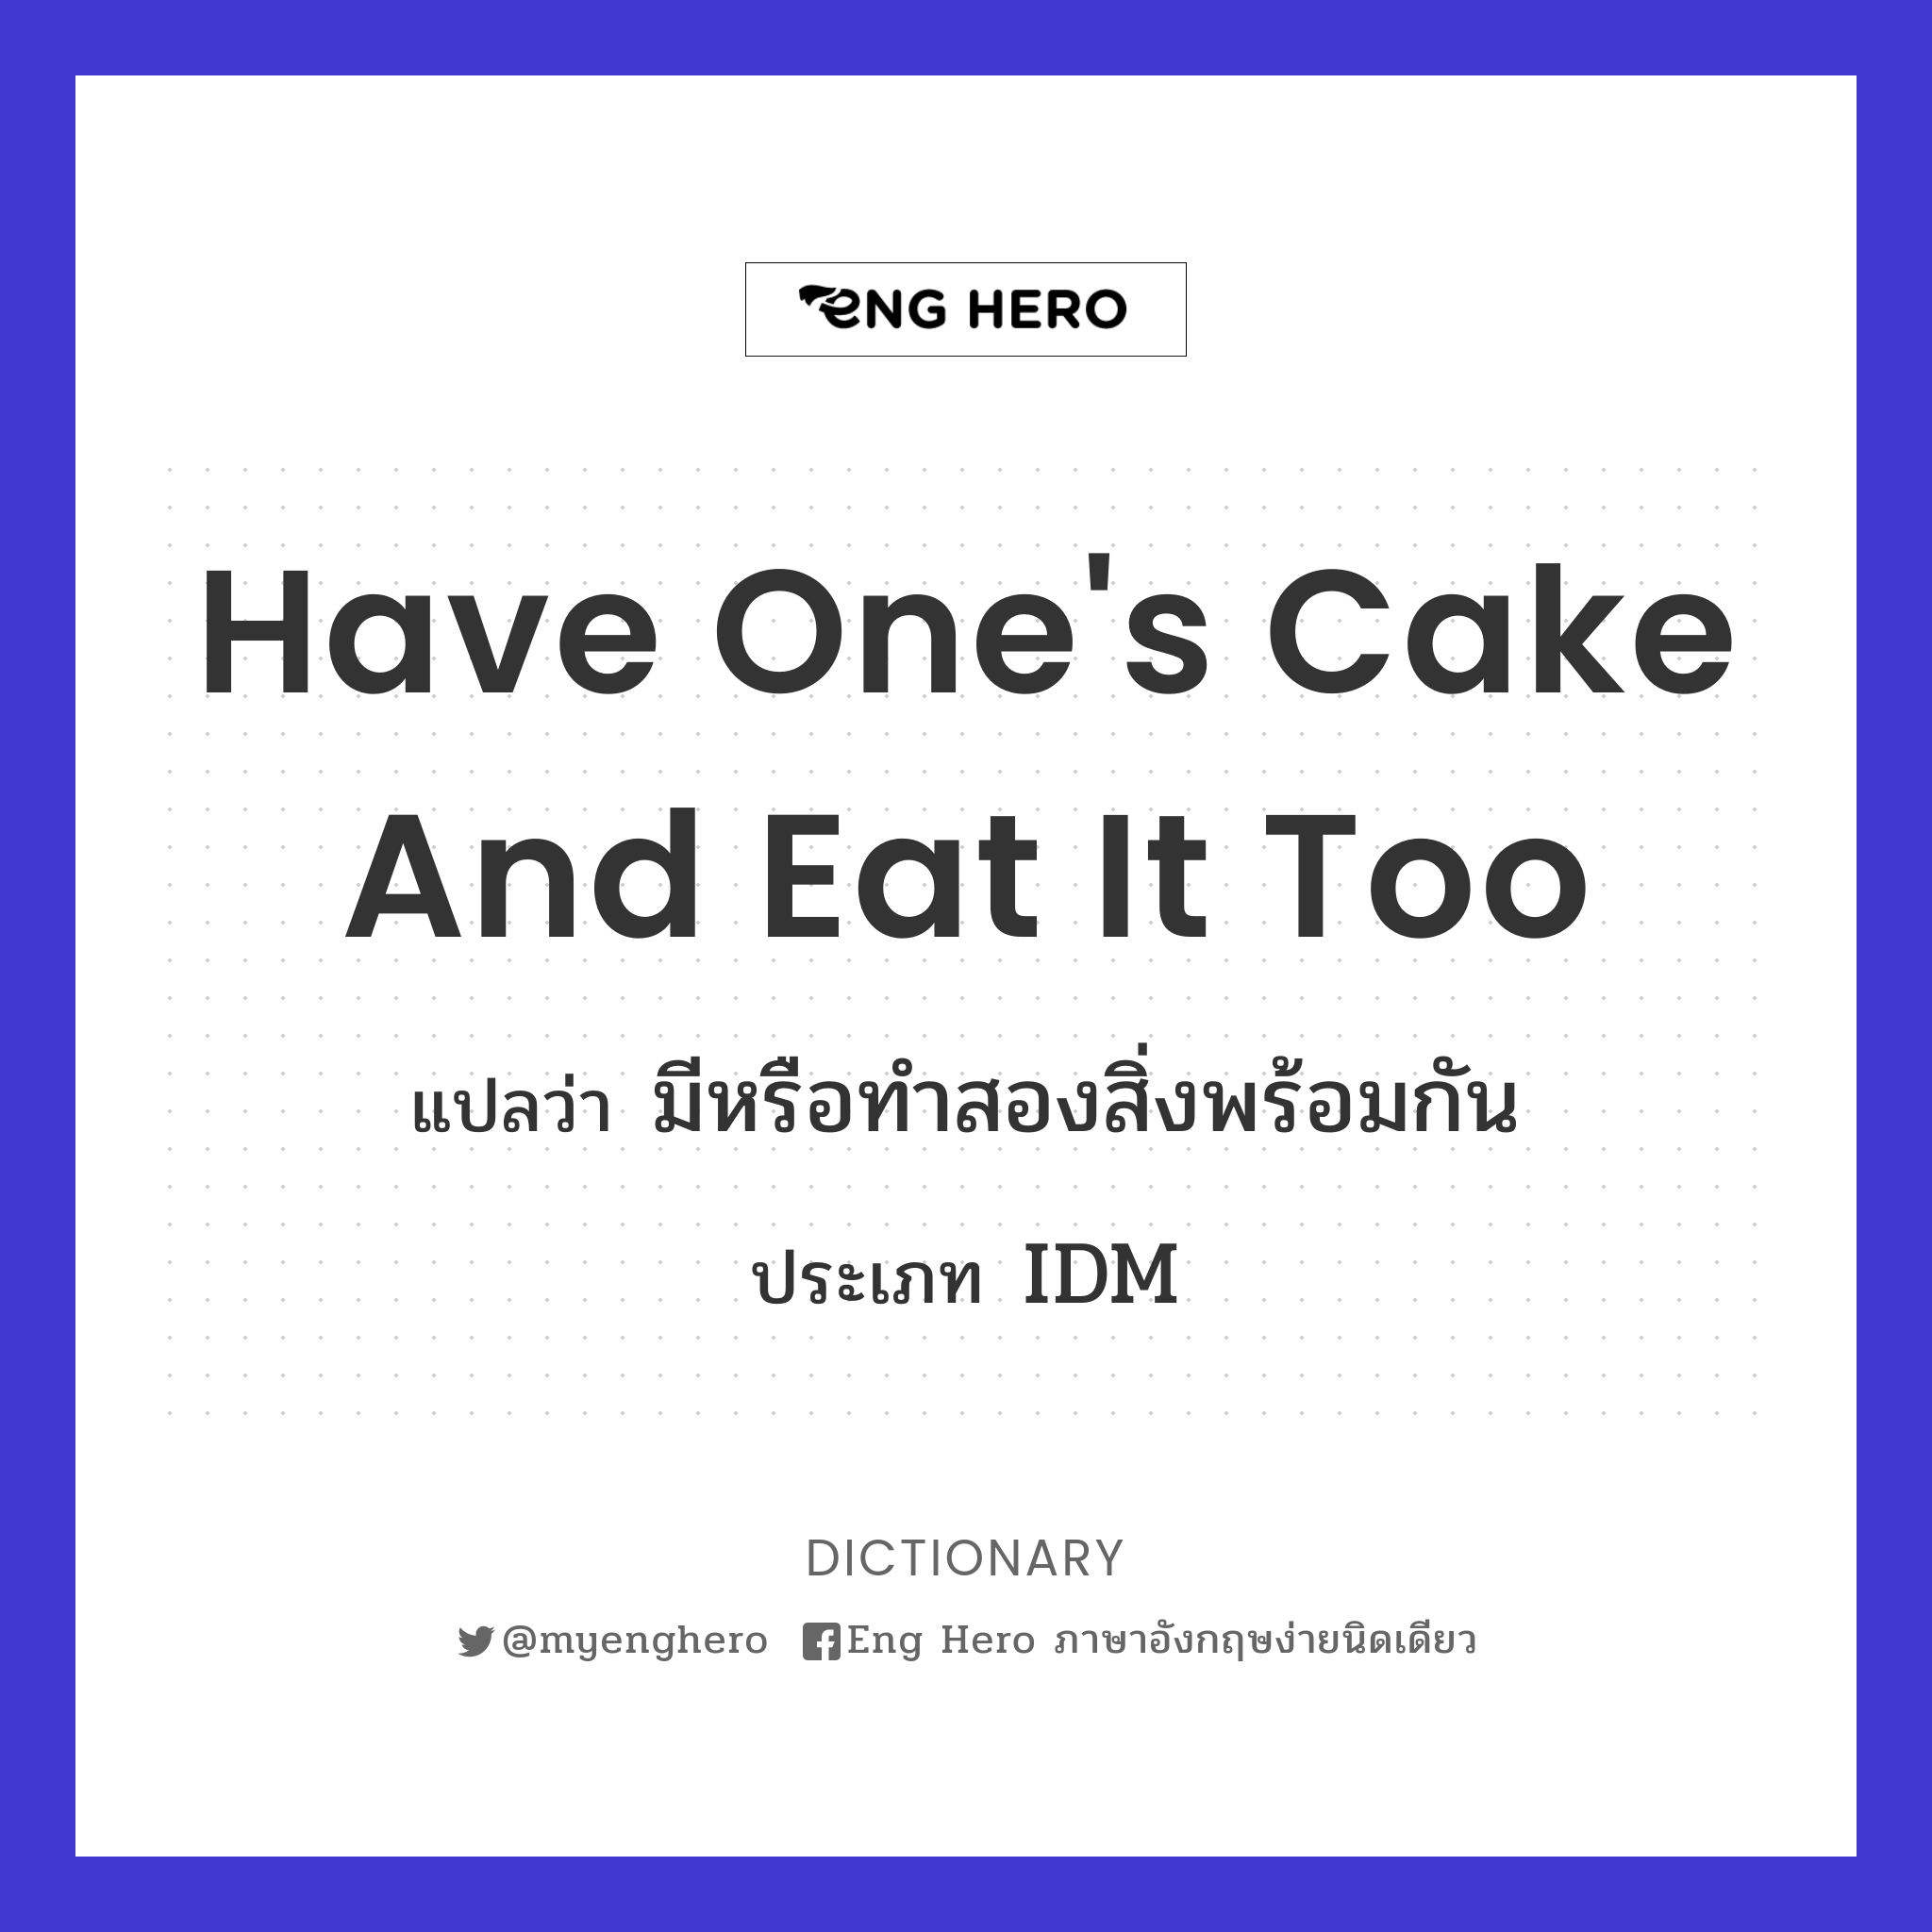 have one's cake and eat it too